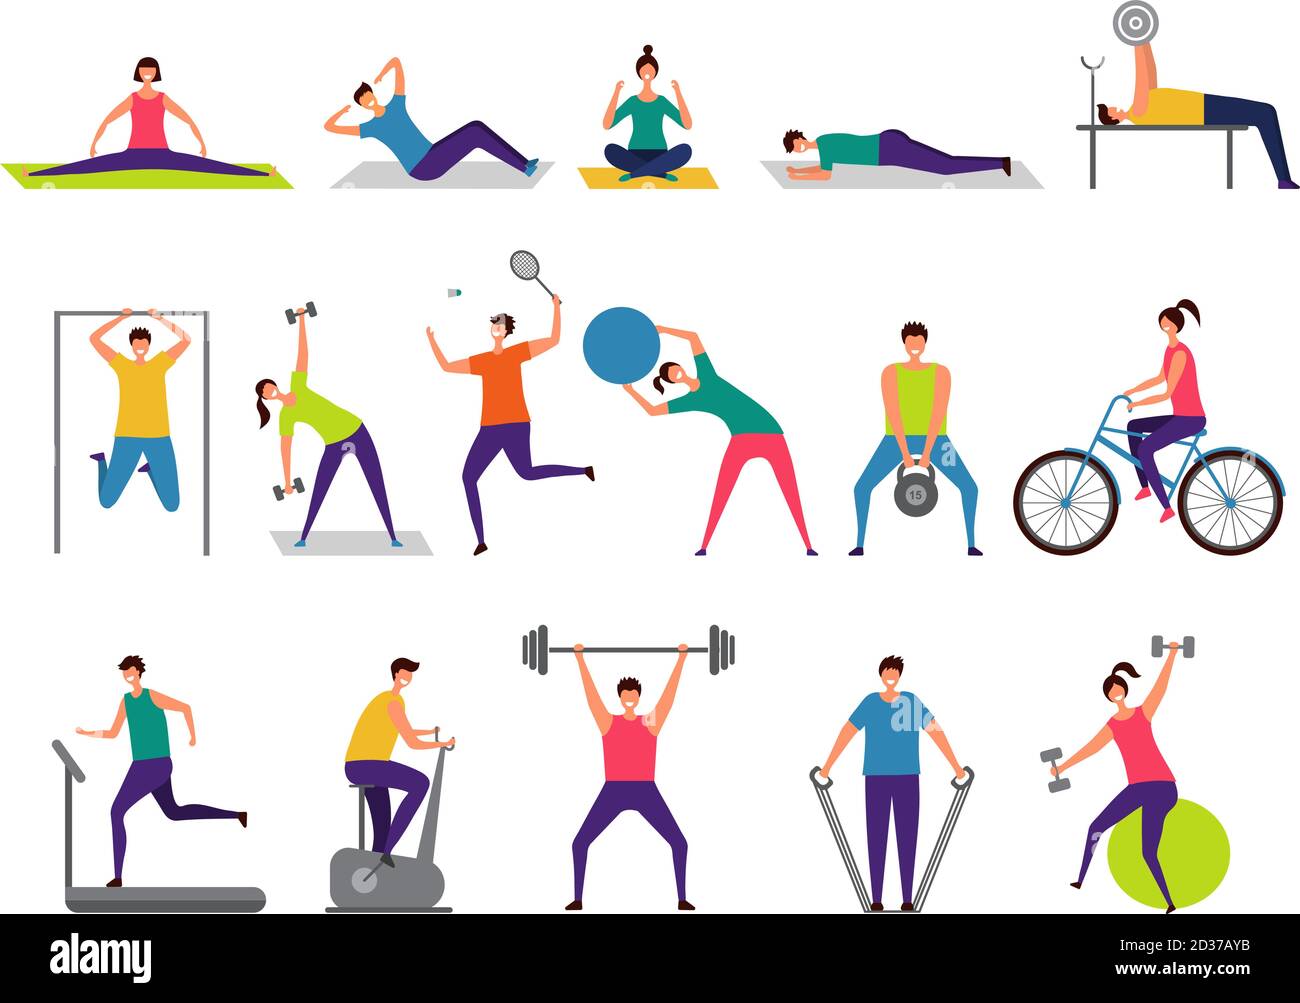 Sport activities. Active people making fitness actions running jumping playing cycling vector characters Stock Vector